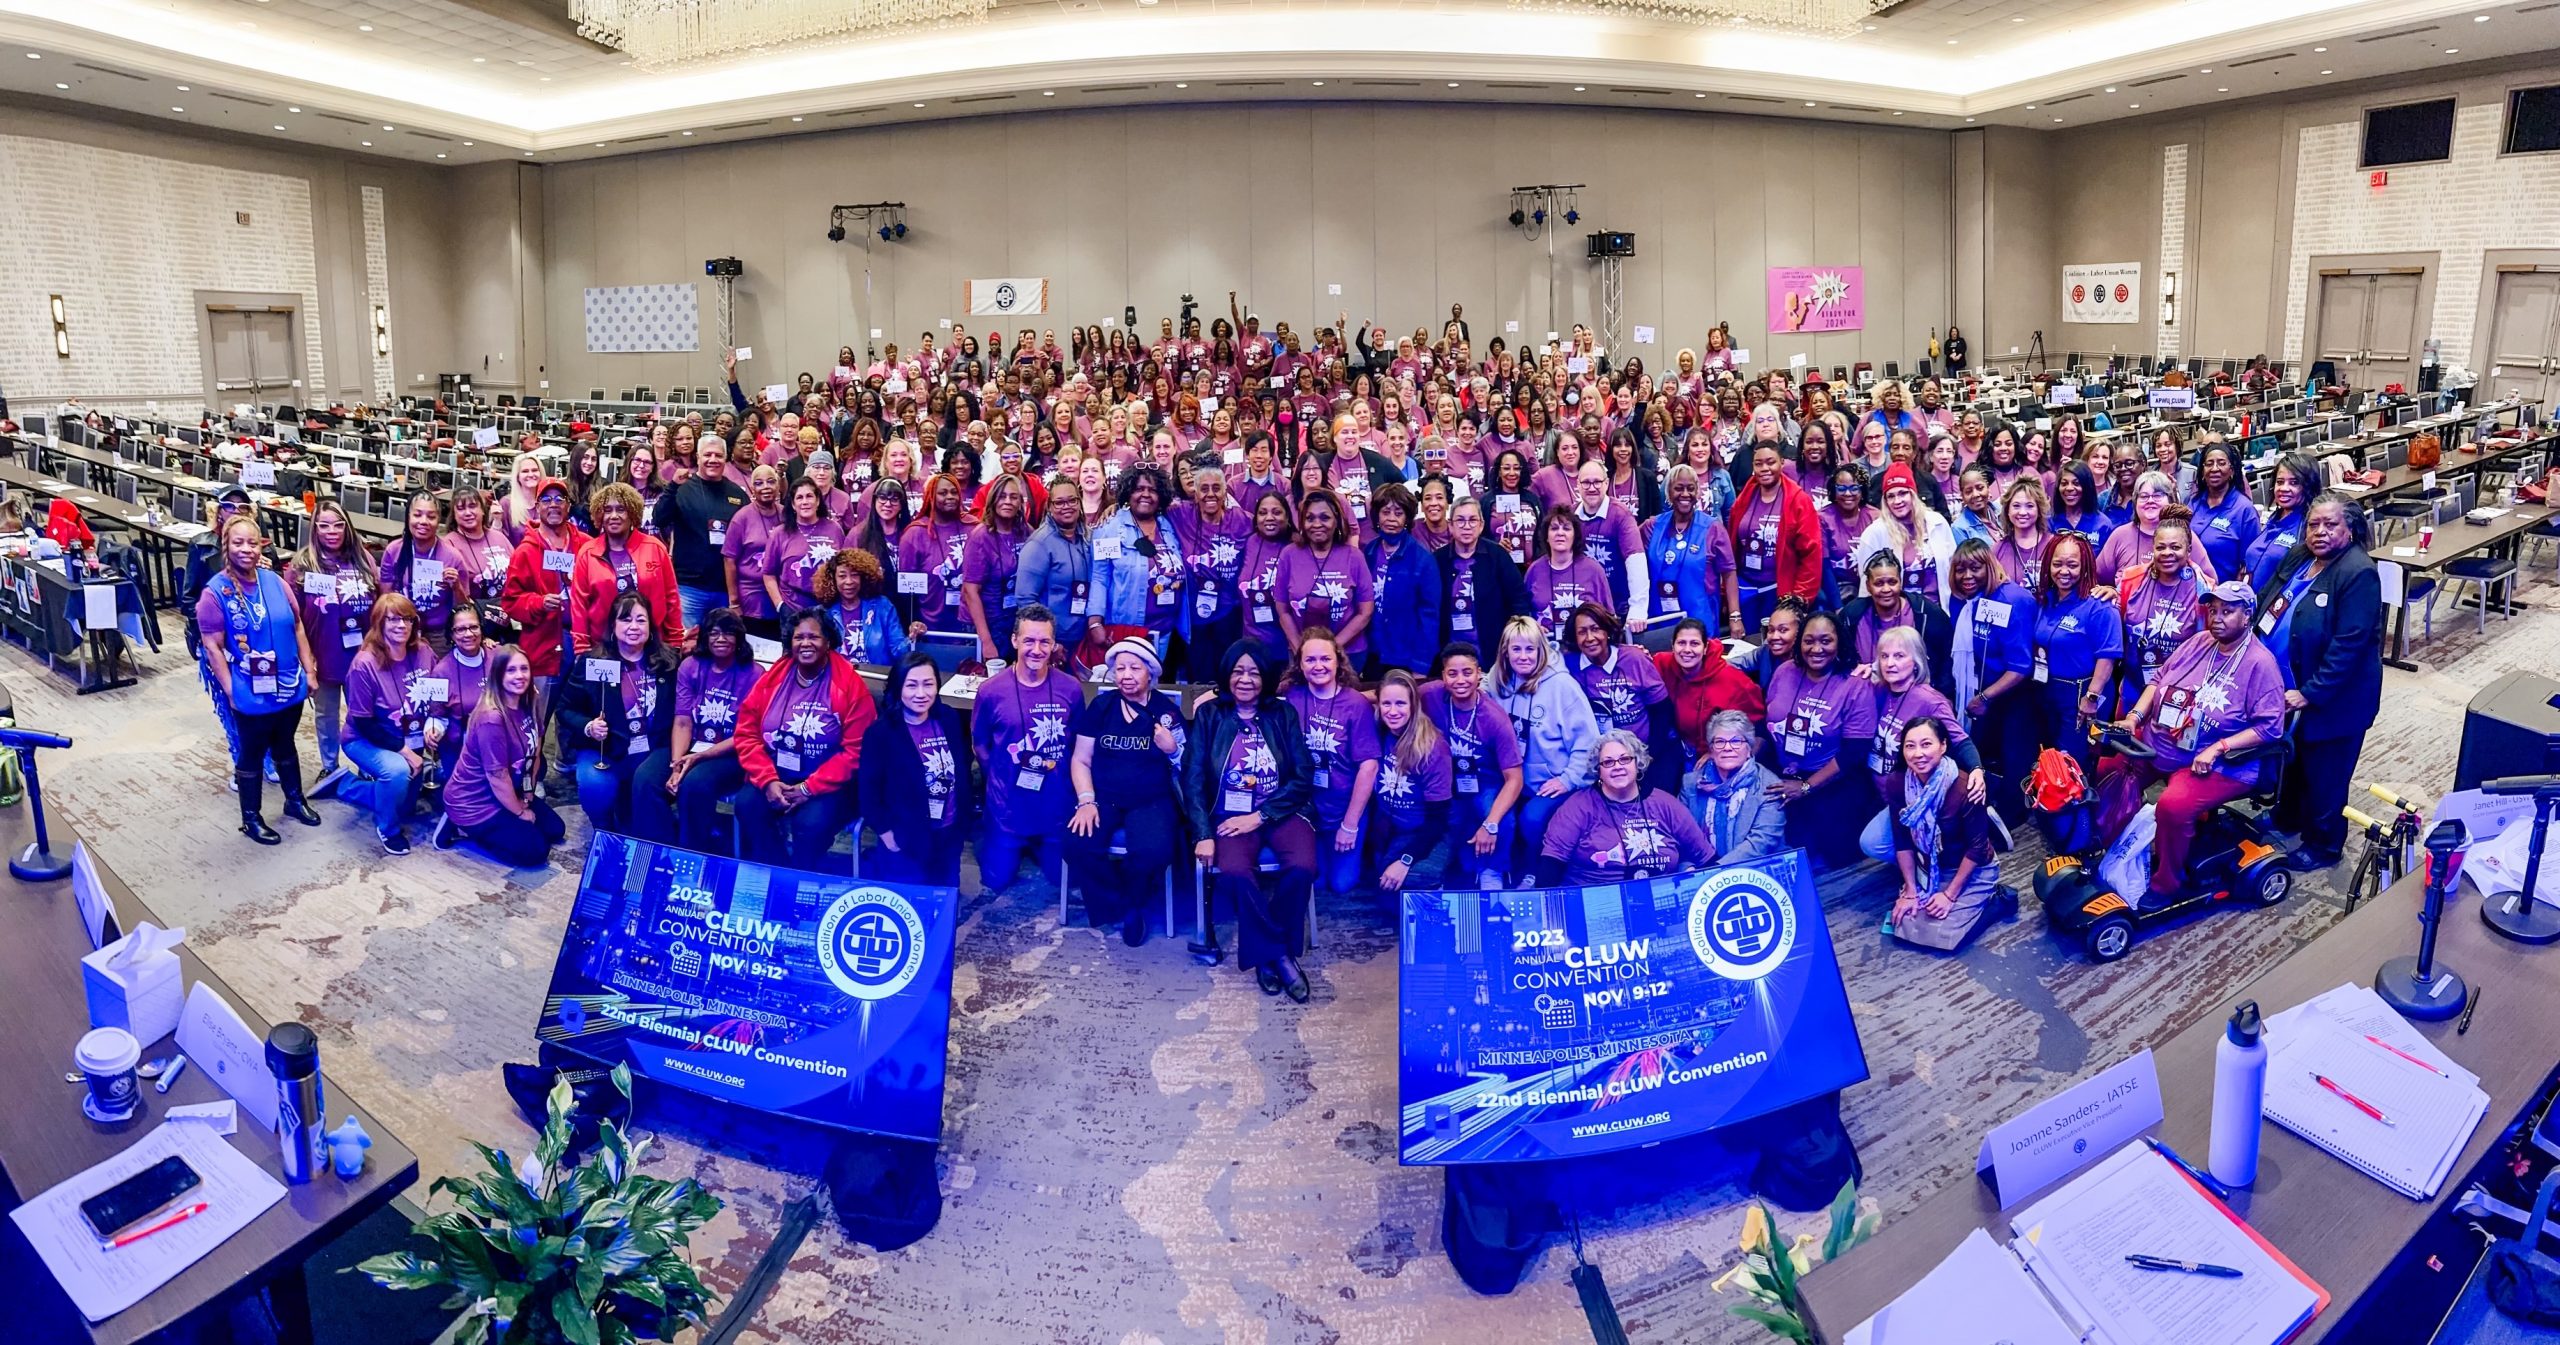 IAM Women Show Strong Presence at CLUW Convention